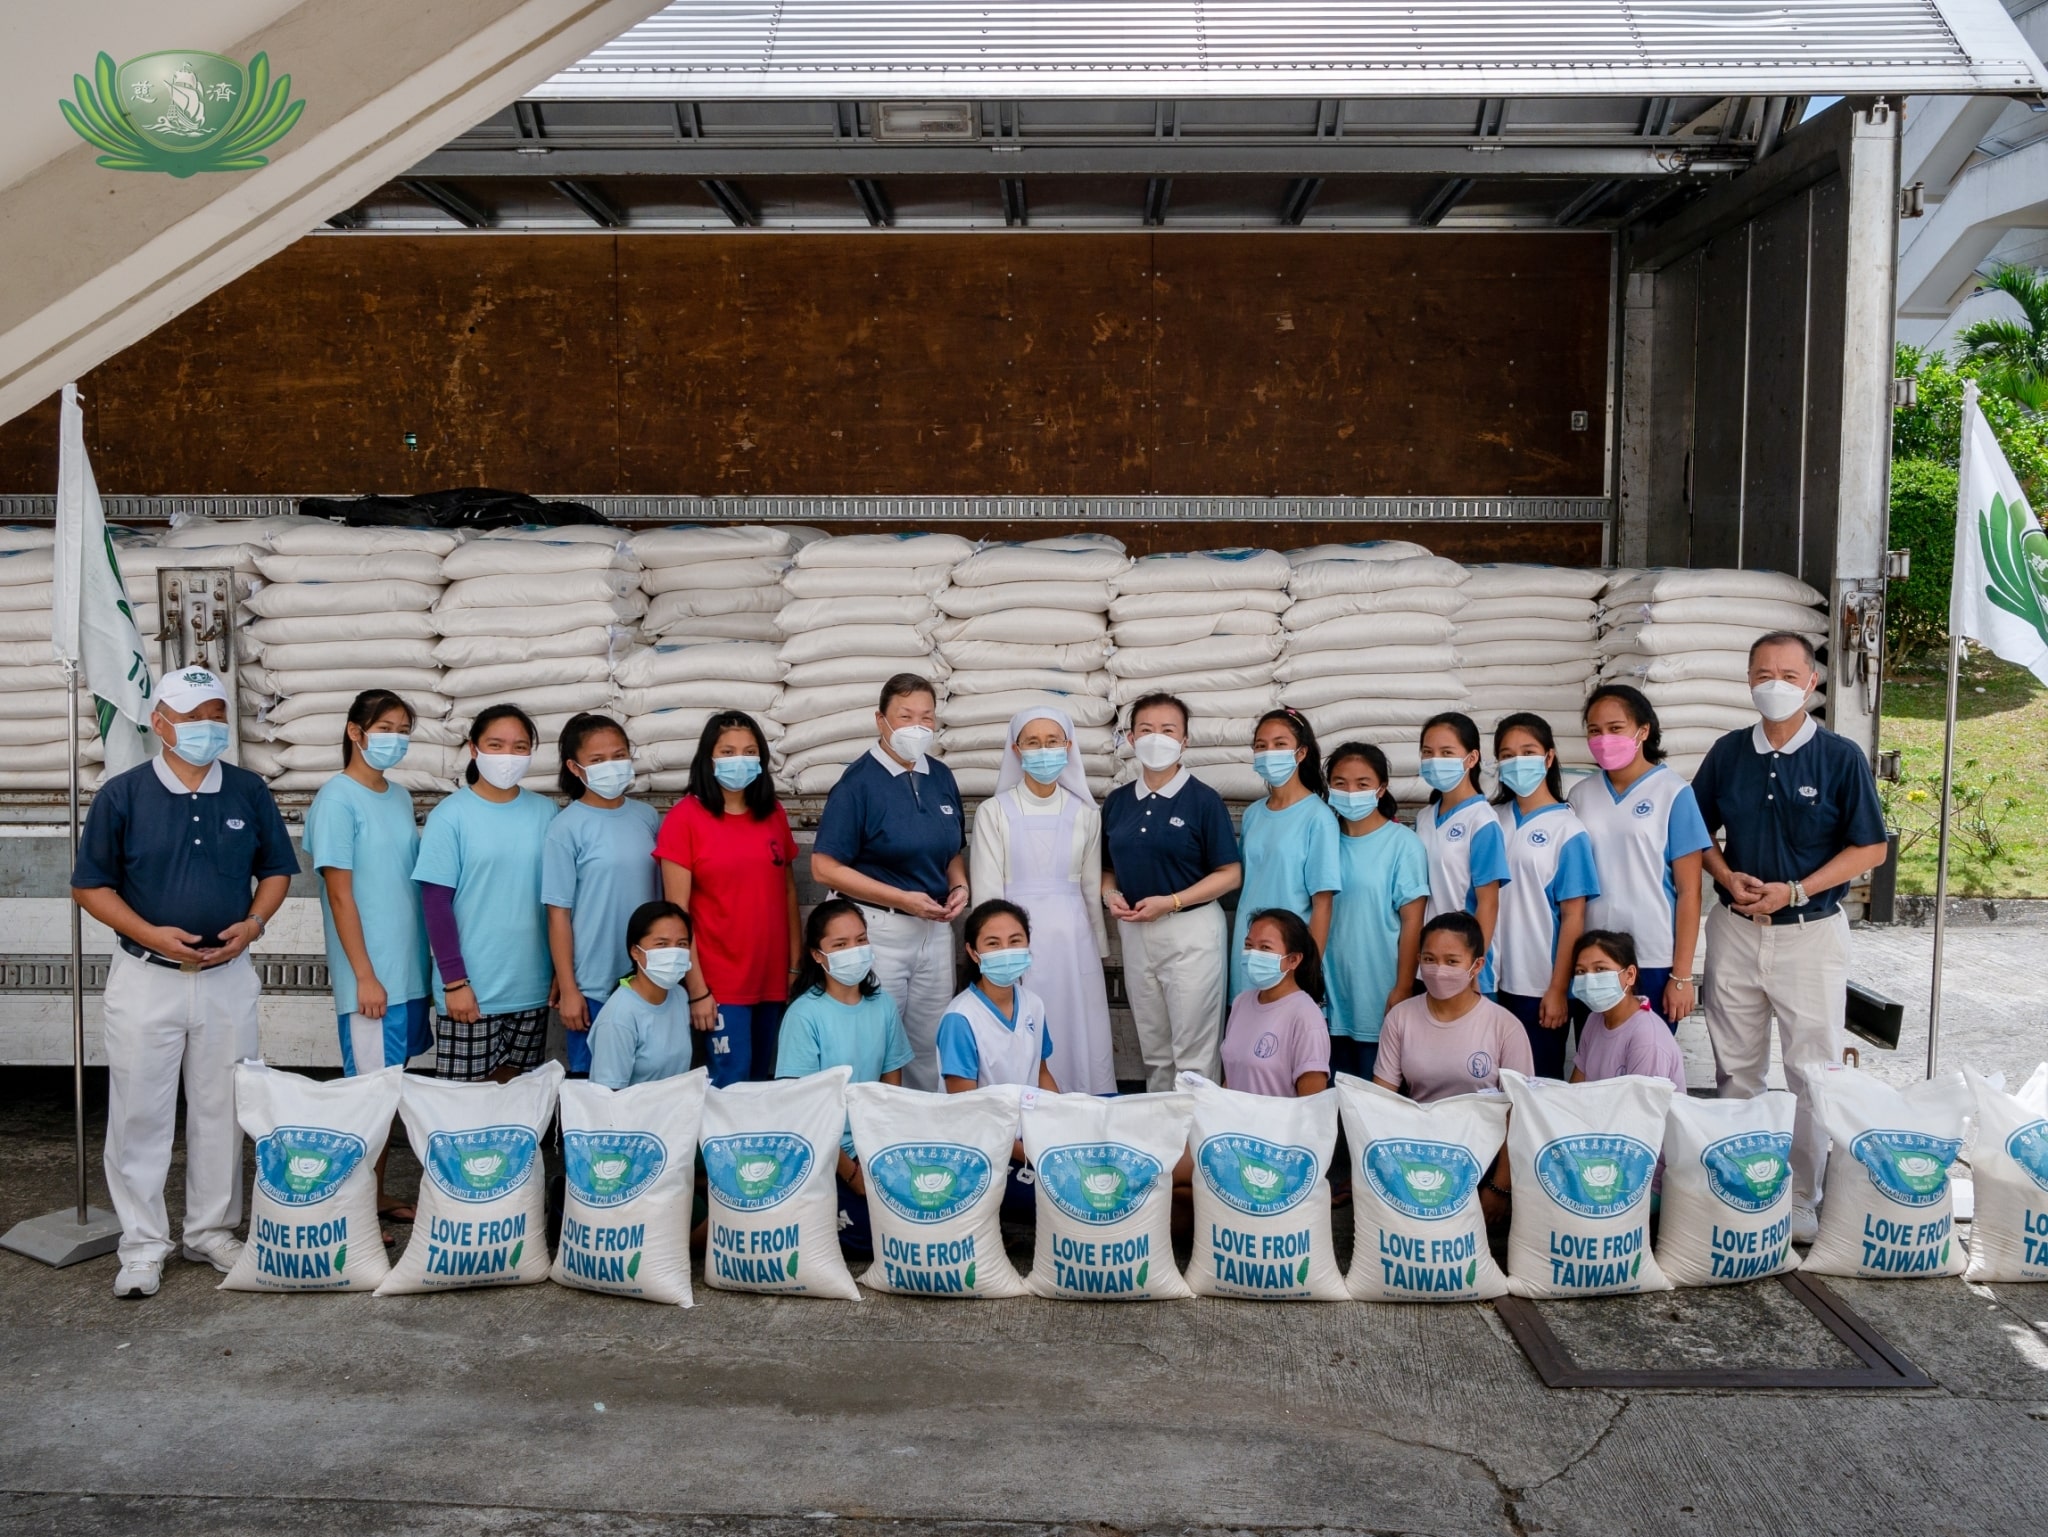 Sisters of Mary nuns and Girlstown students pose with Tzu Chi volunteers by the truck carrying donated sacks of rice.【Photo by Daniel Lazar】